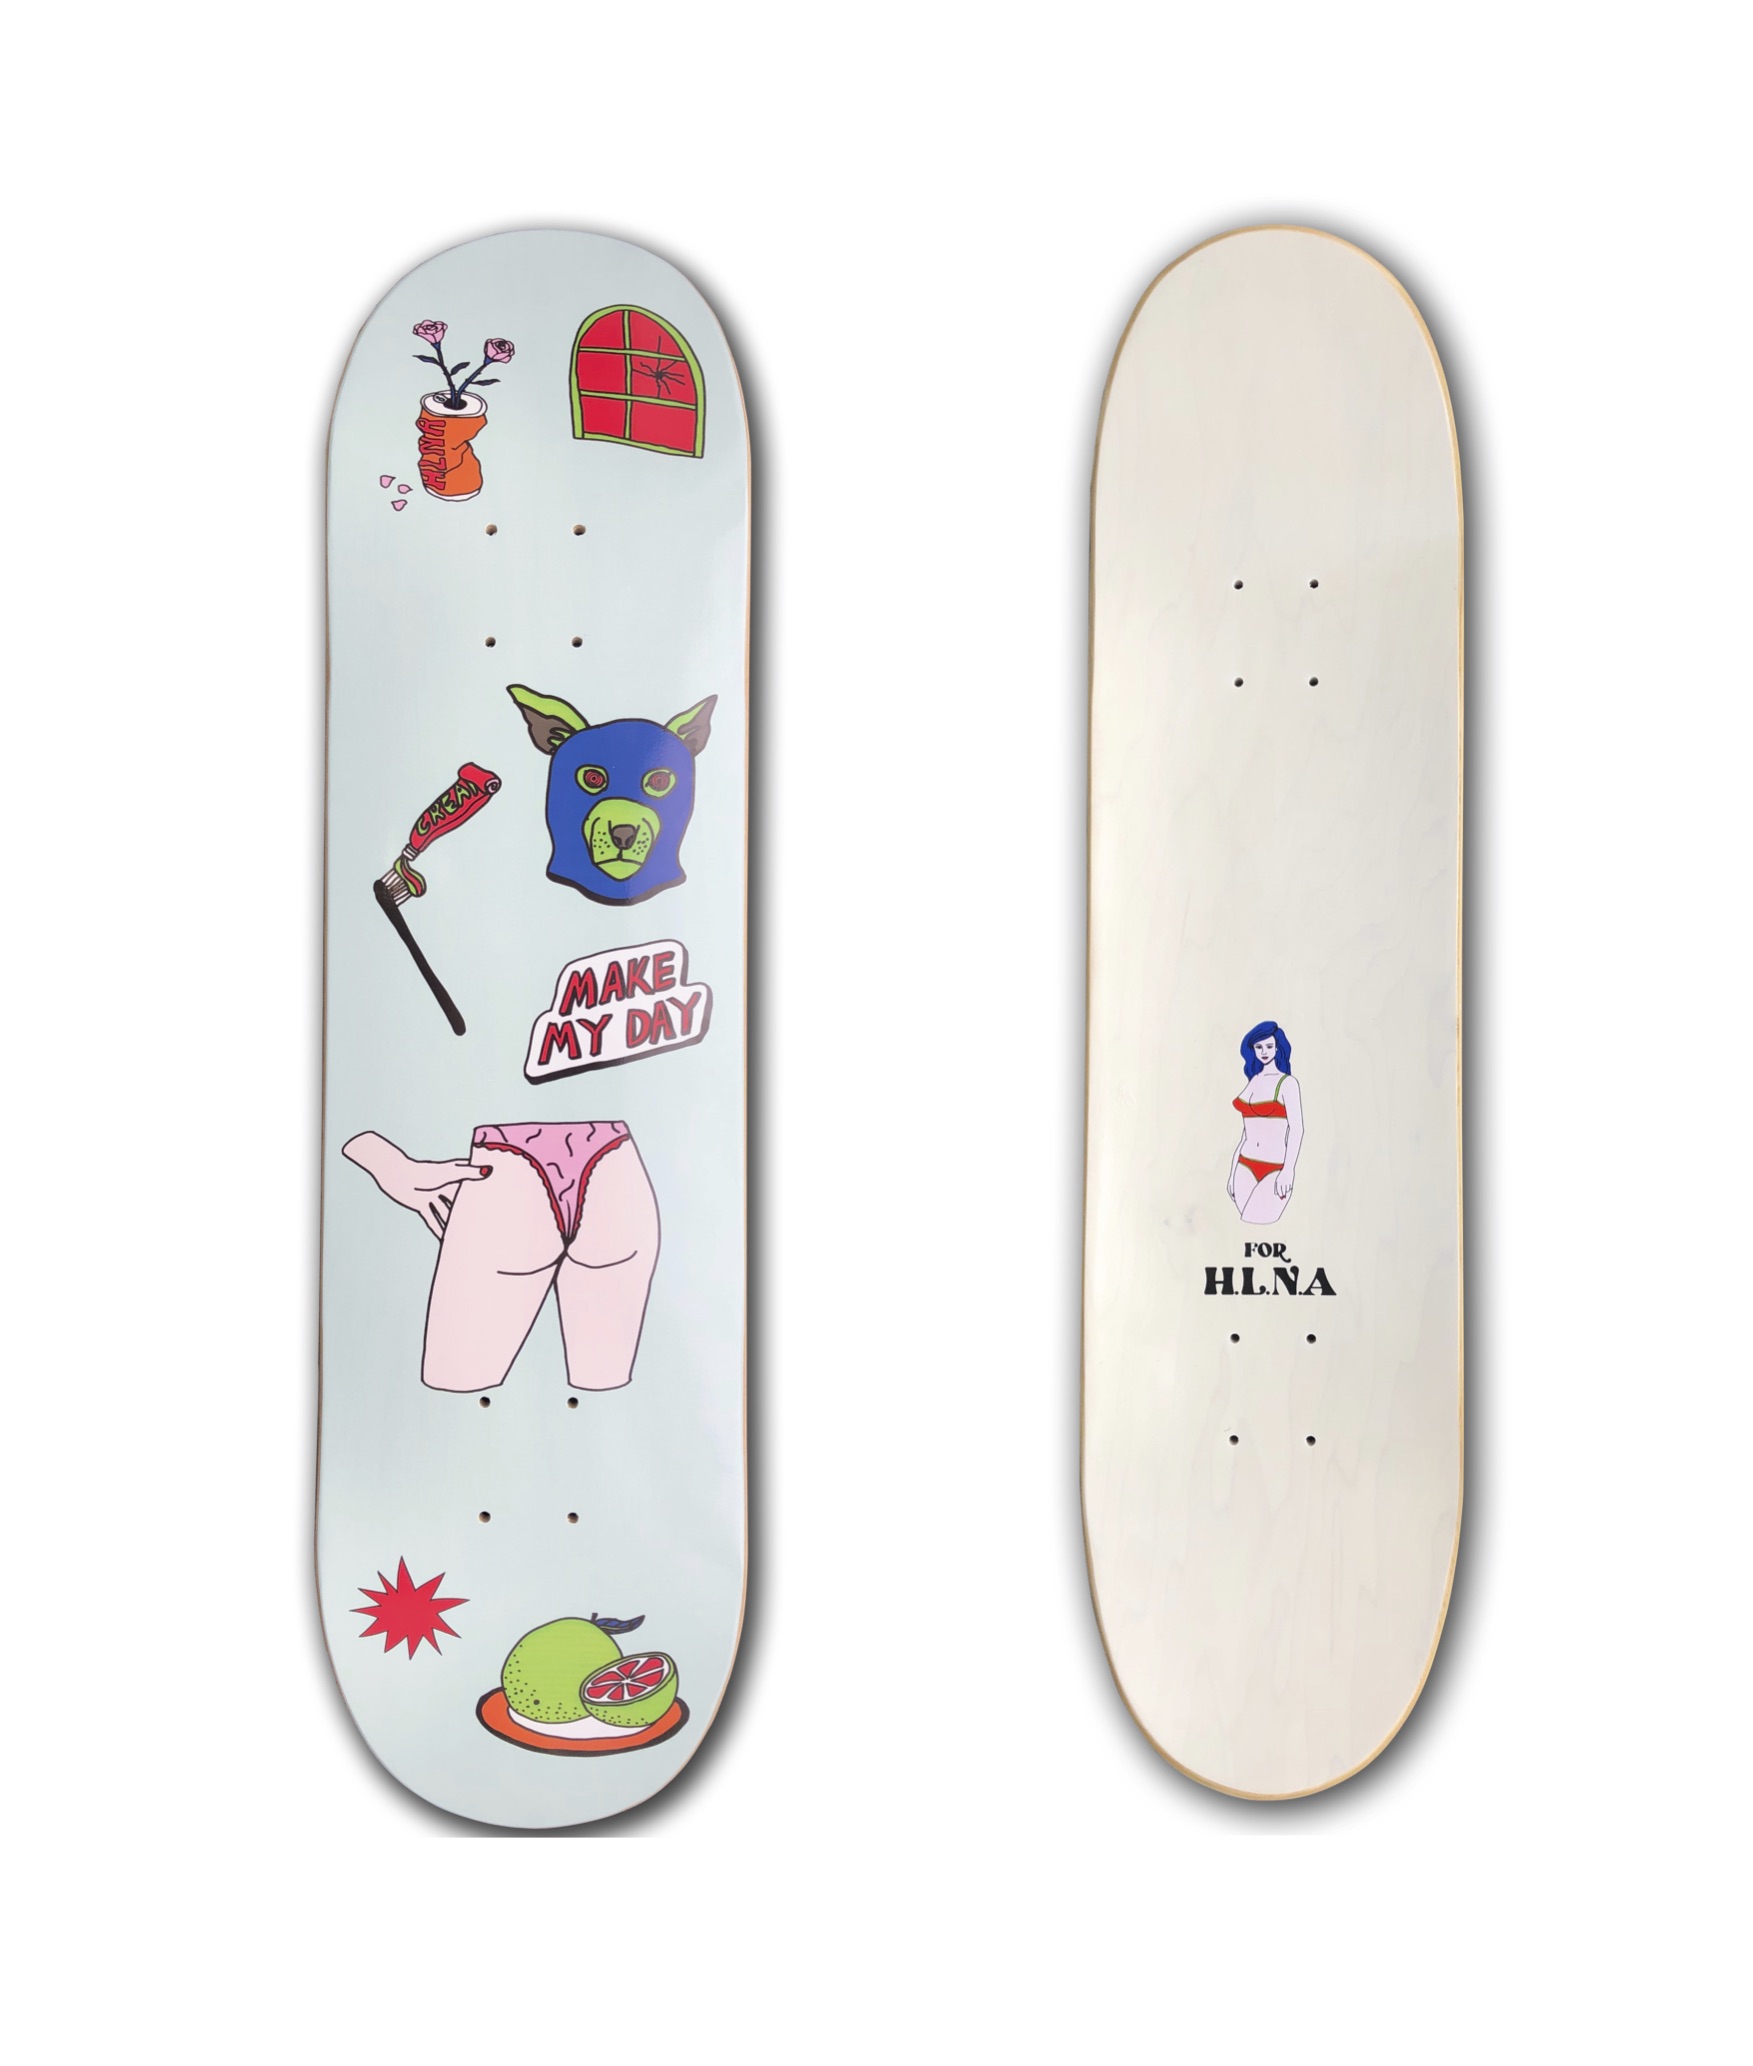 H.L.N.A SKATEBOARD ARTIST COLLECTION~<br>“ボードスポーツを次世代に